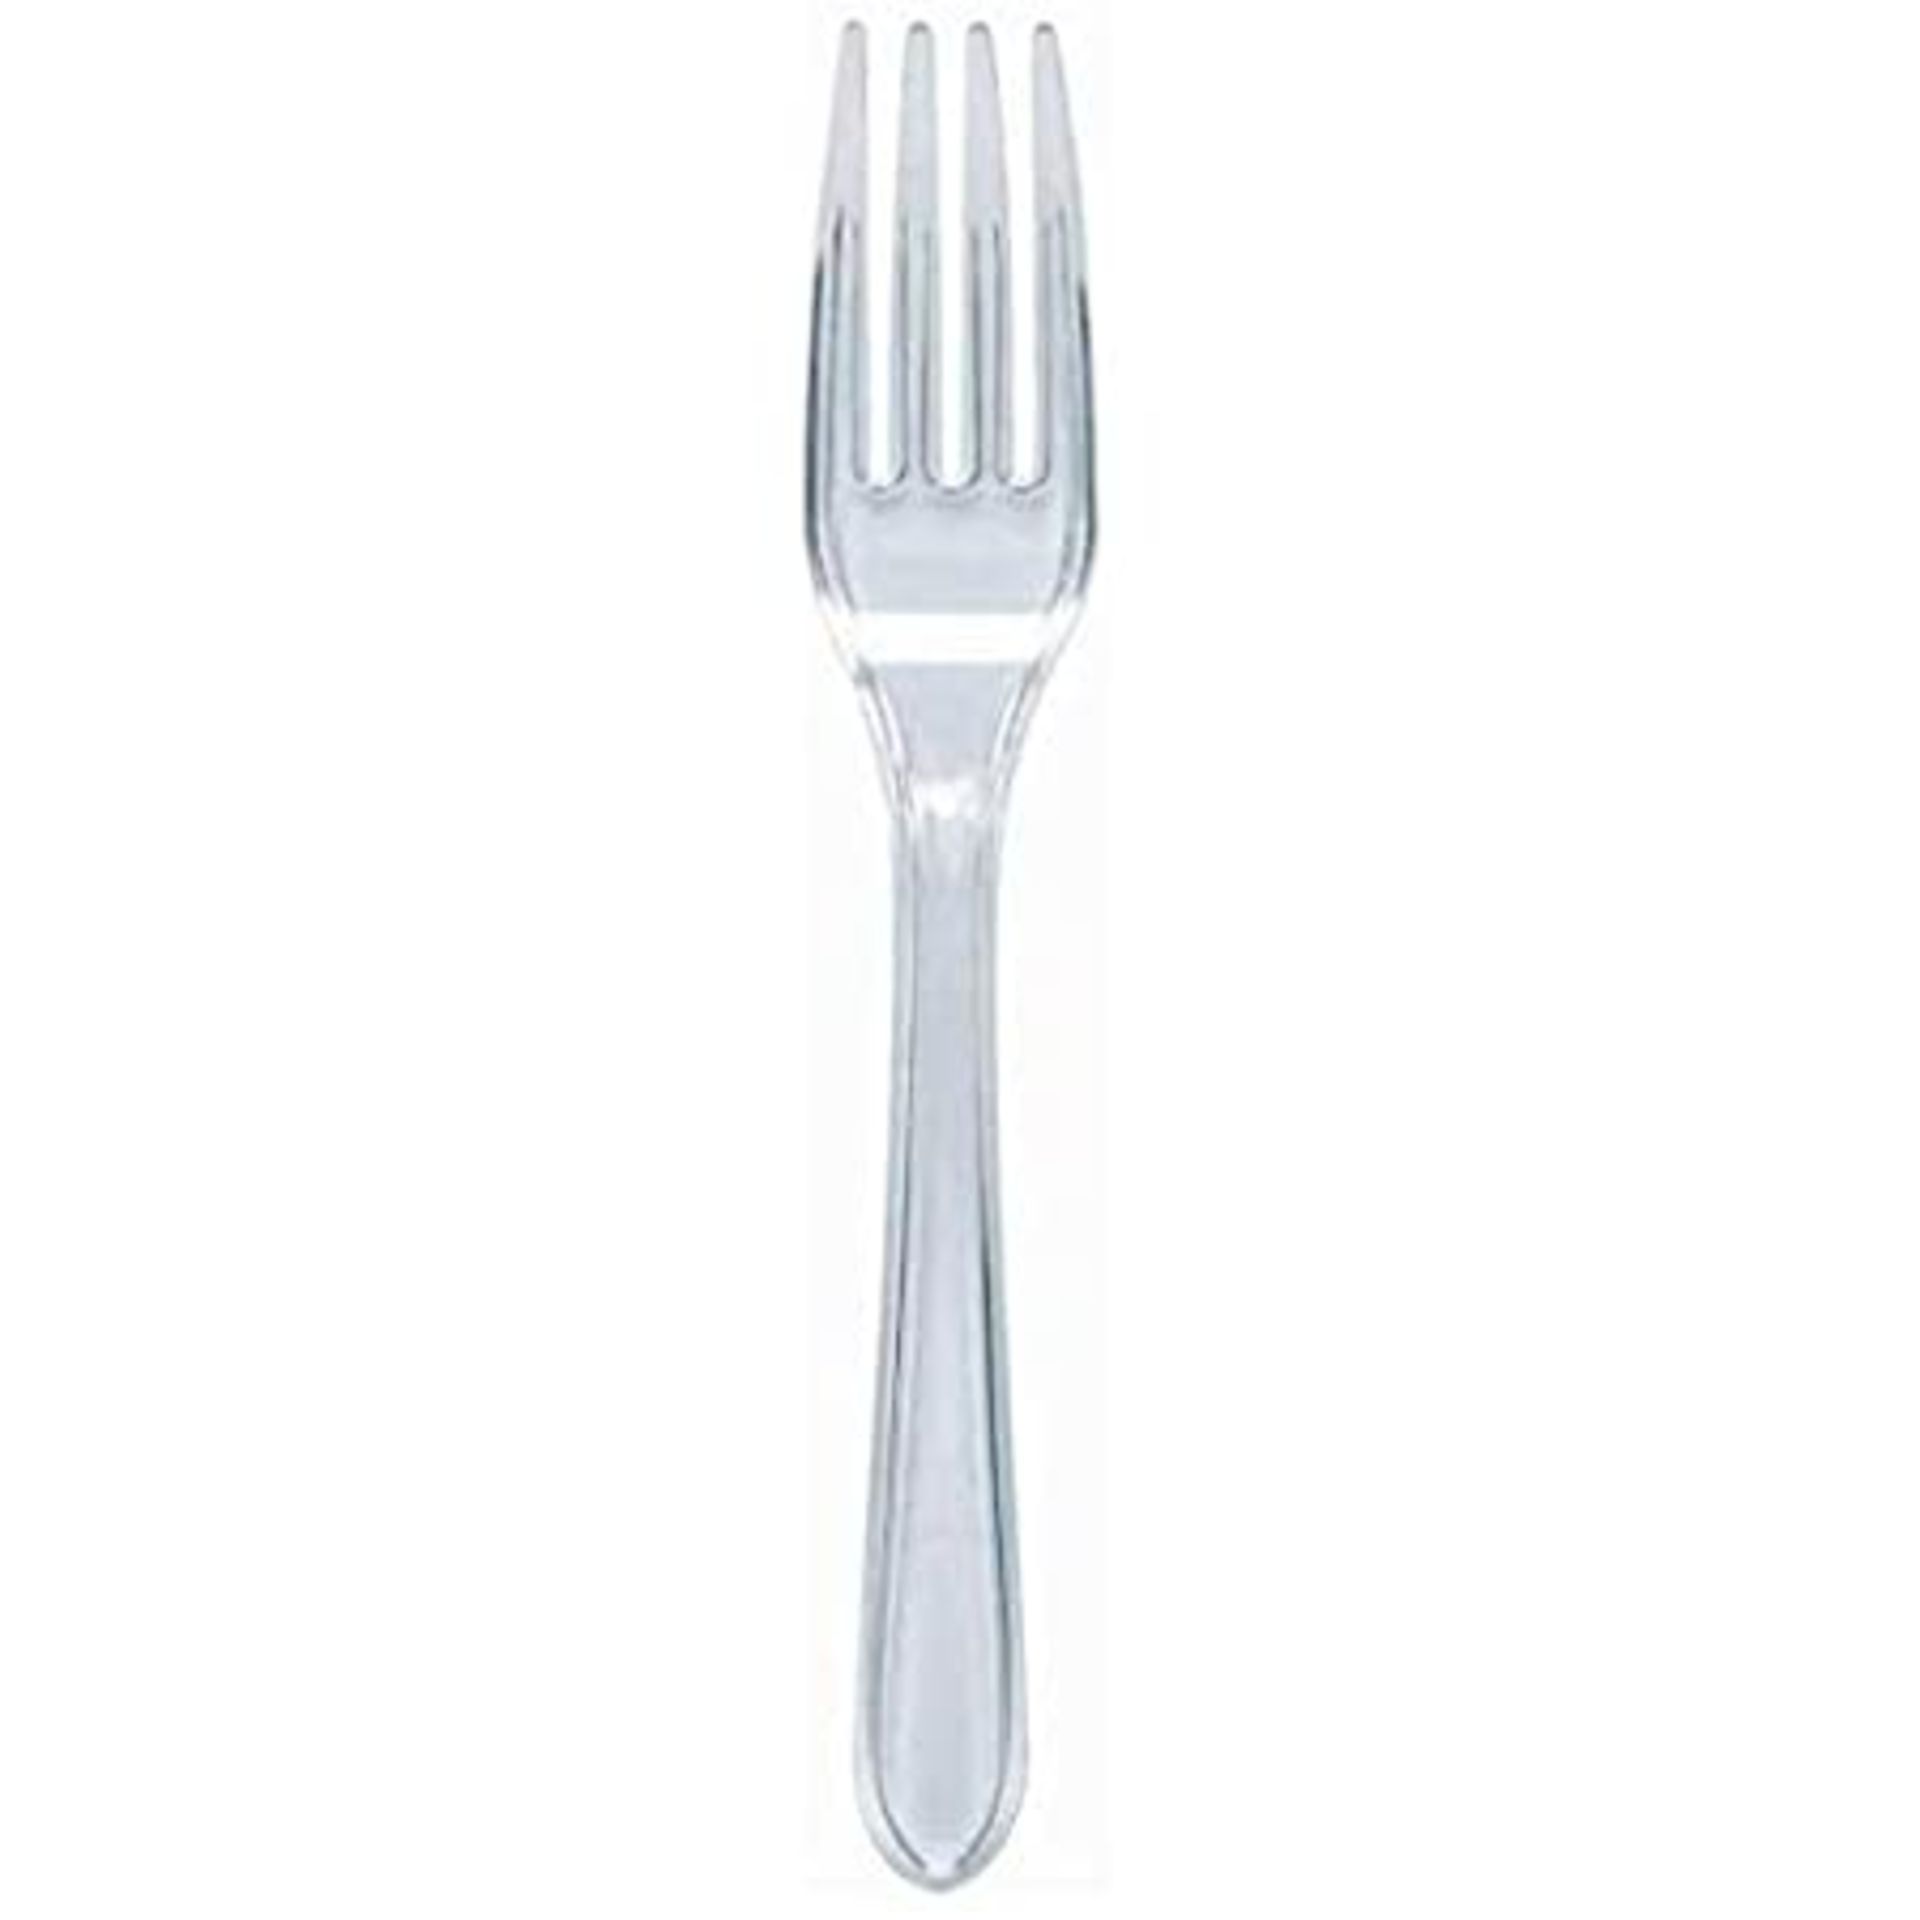 RRP - £6.98 50 Clear Plastic Forks Strong Heavy Duty (Washable & Reusable)